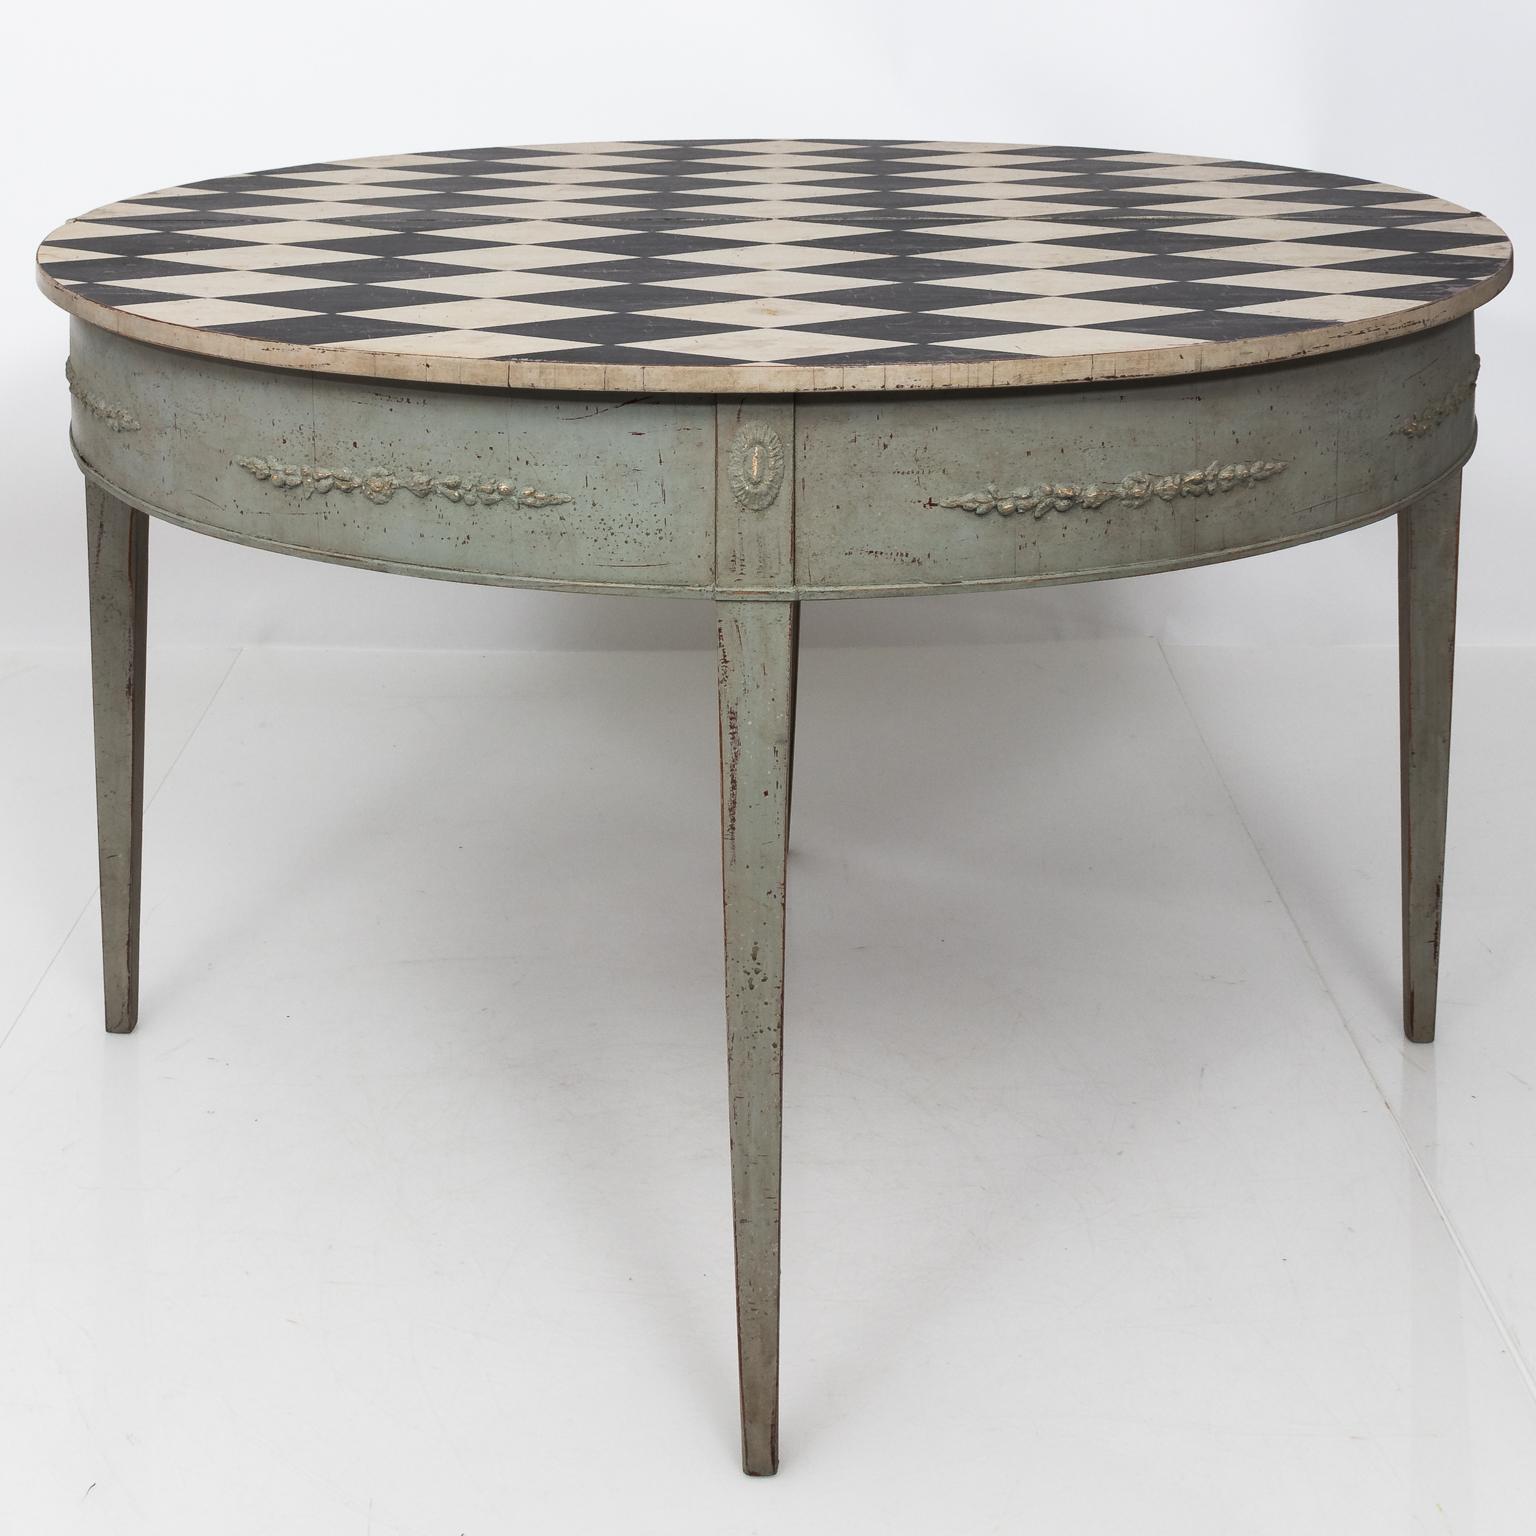 Late 1700s round drop leaf Gustavian style table with black and white parcquet diamond pattern work on the table top and plain tapered legs.
 